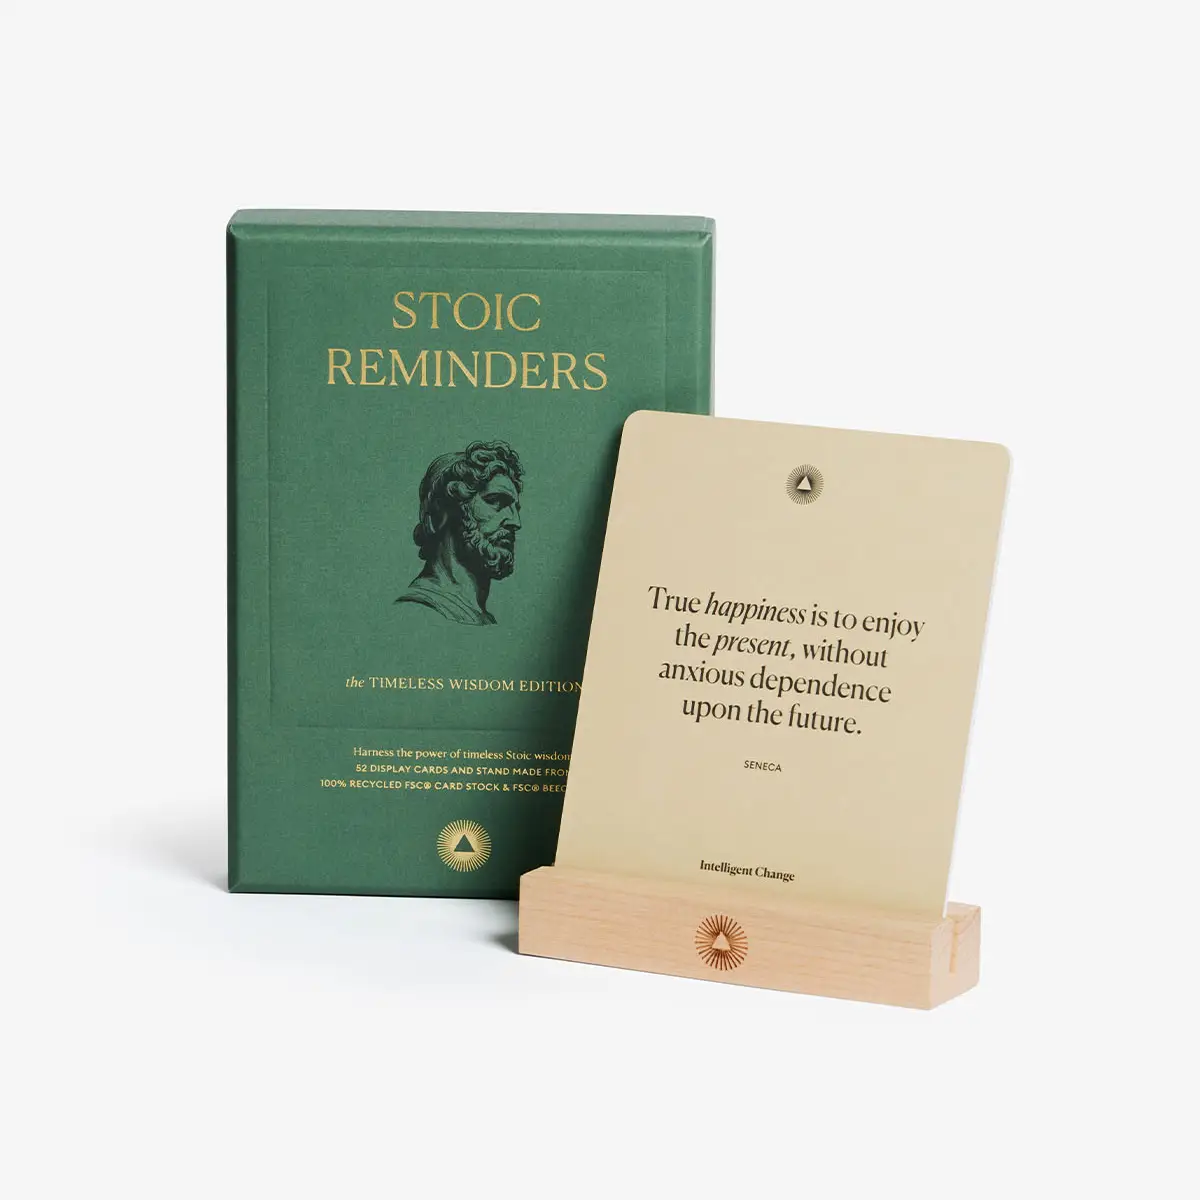 Stoic Reminder Cards